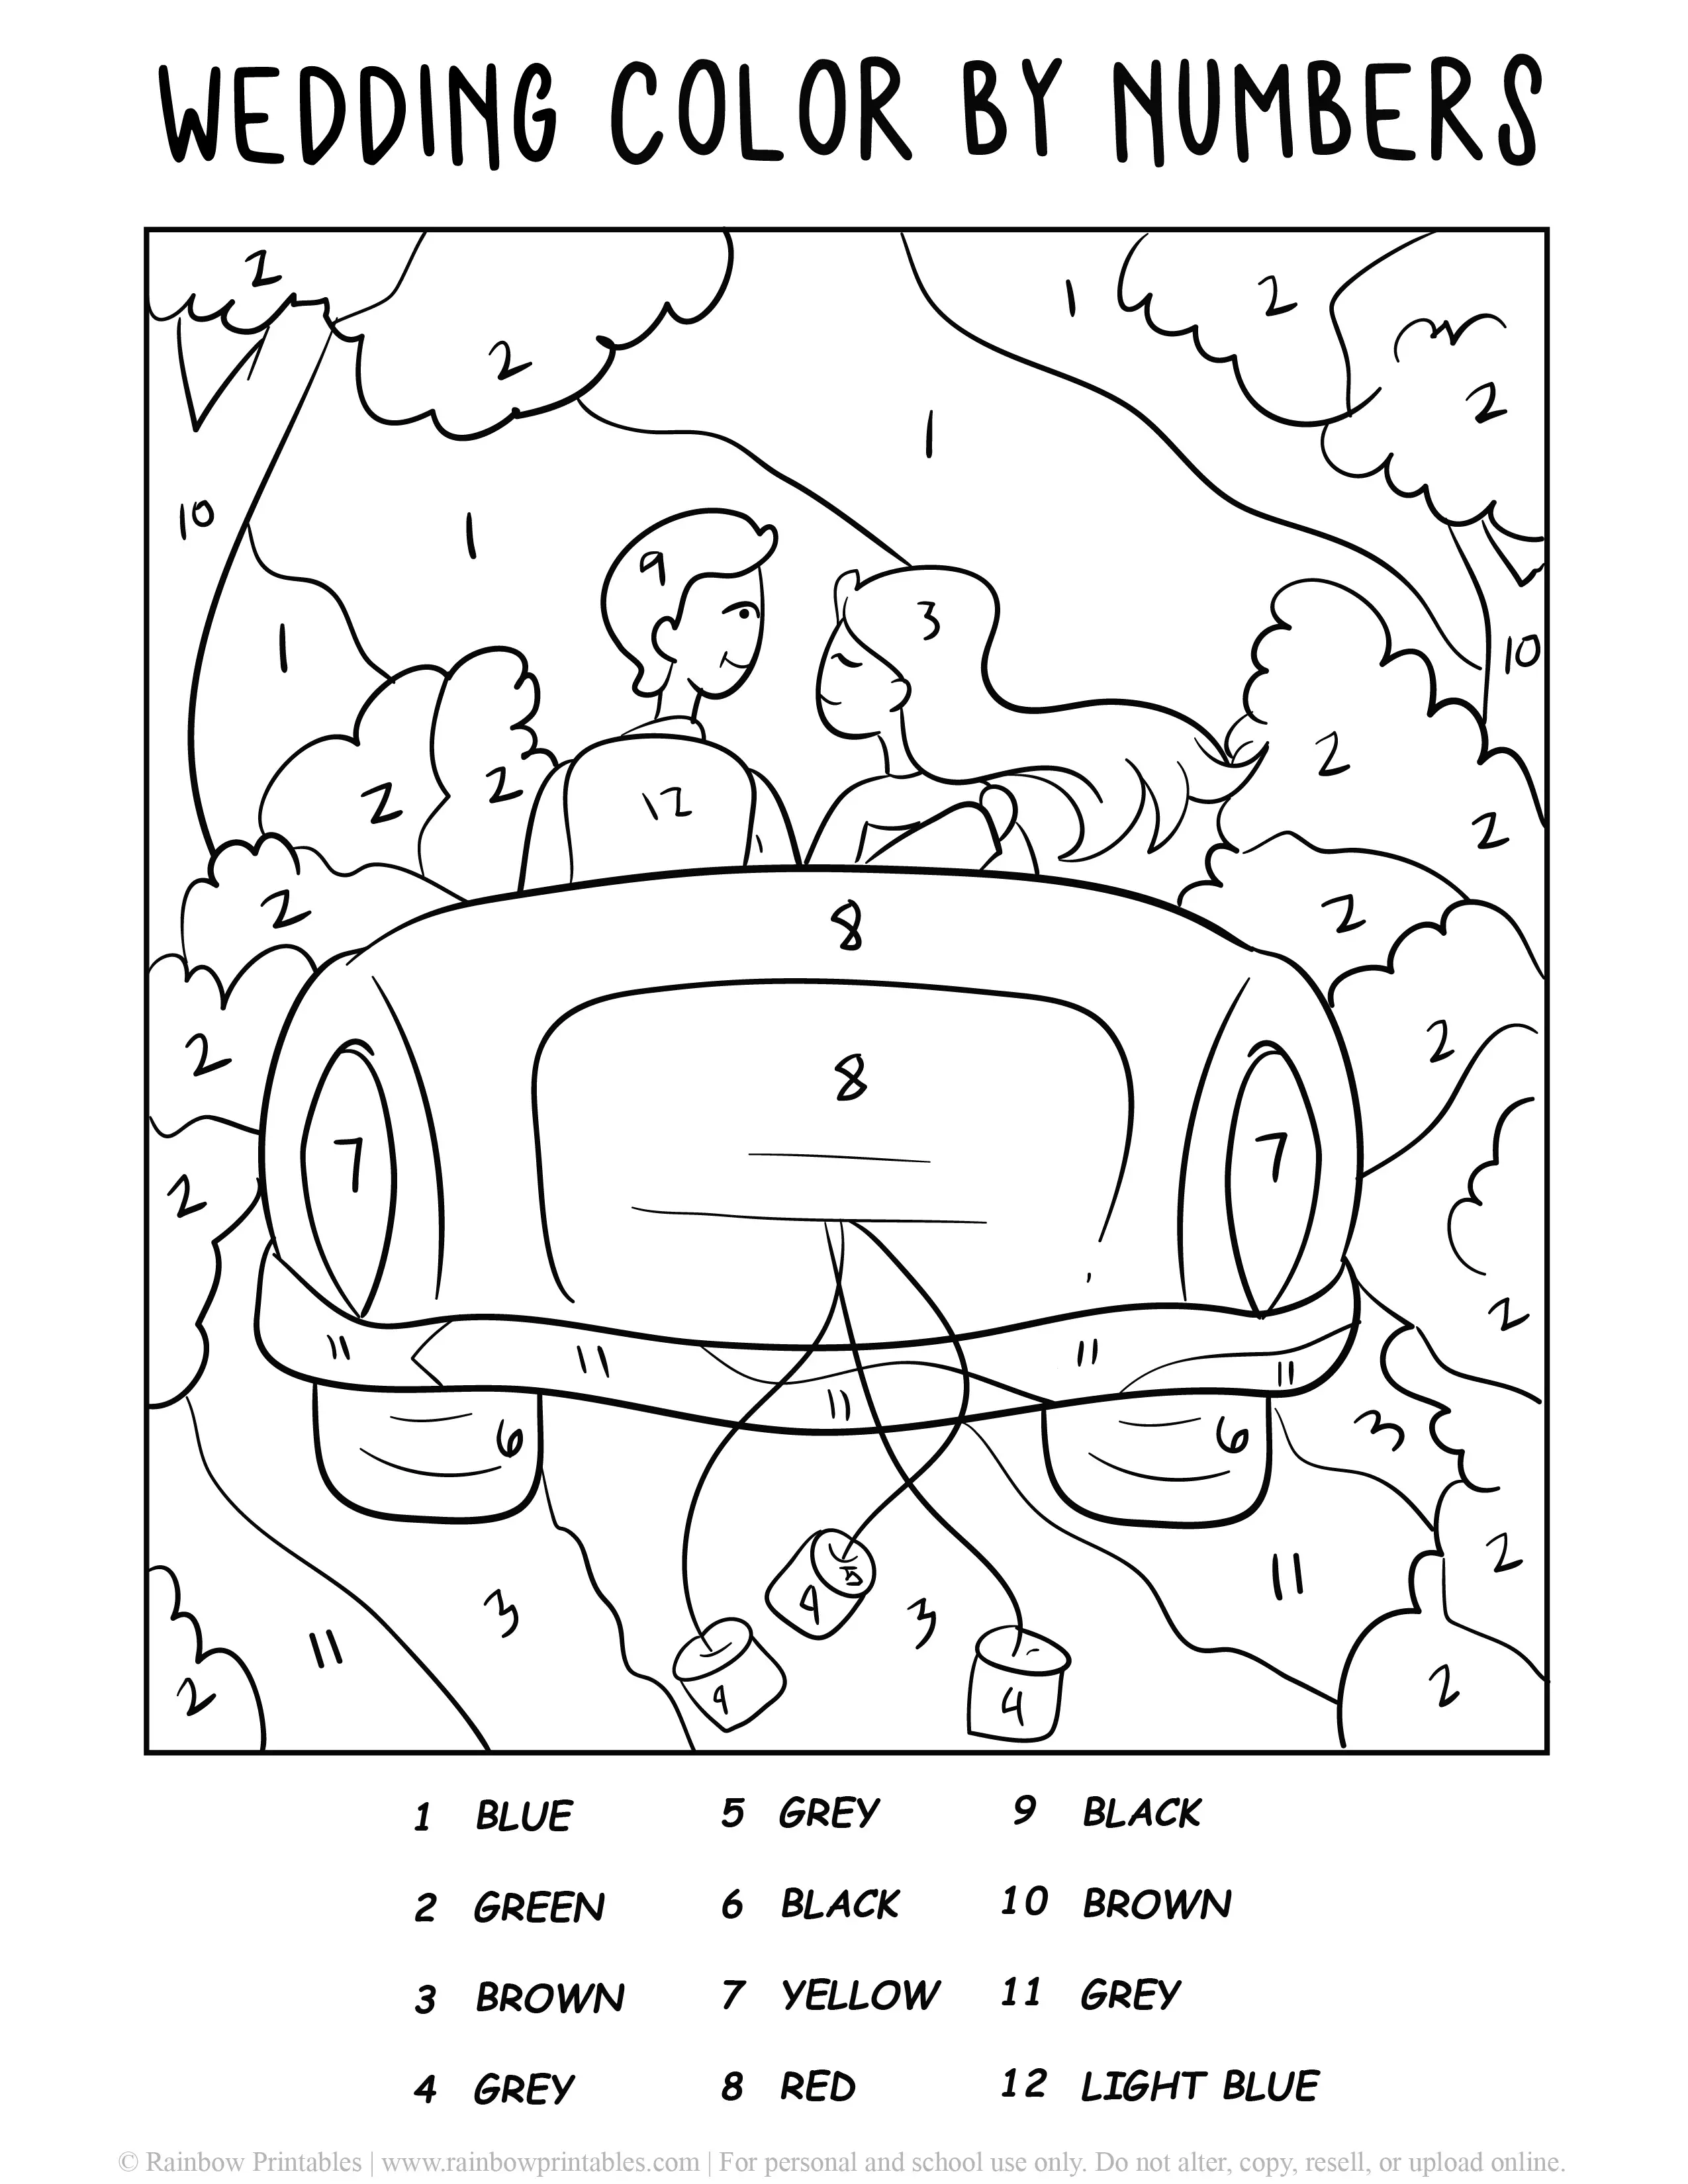 Wedding Color By Number Bride Groom in Car Marriage Math Educational Game Activity for Kids Easy Worksheet Printable PDF JPEG EASY Coloring Sheet Wedding